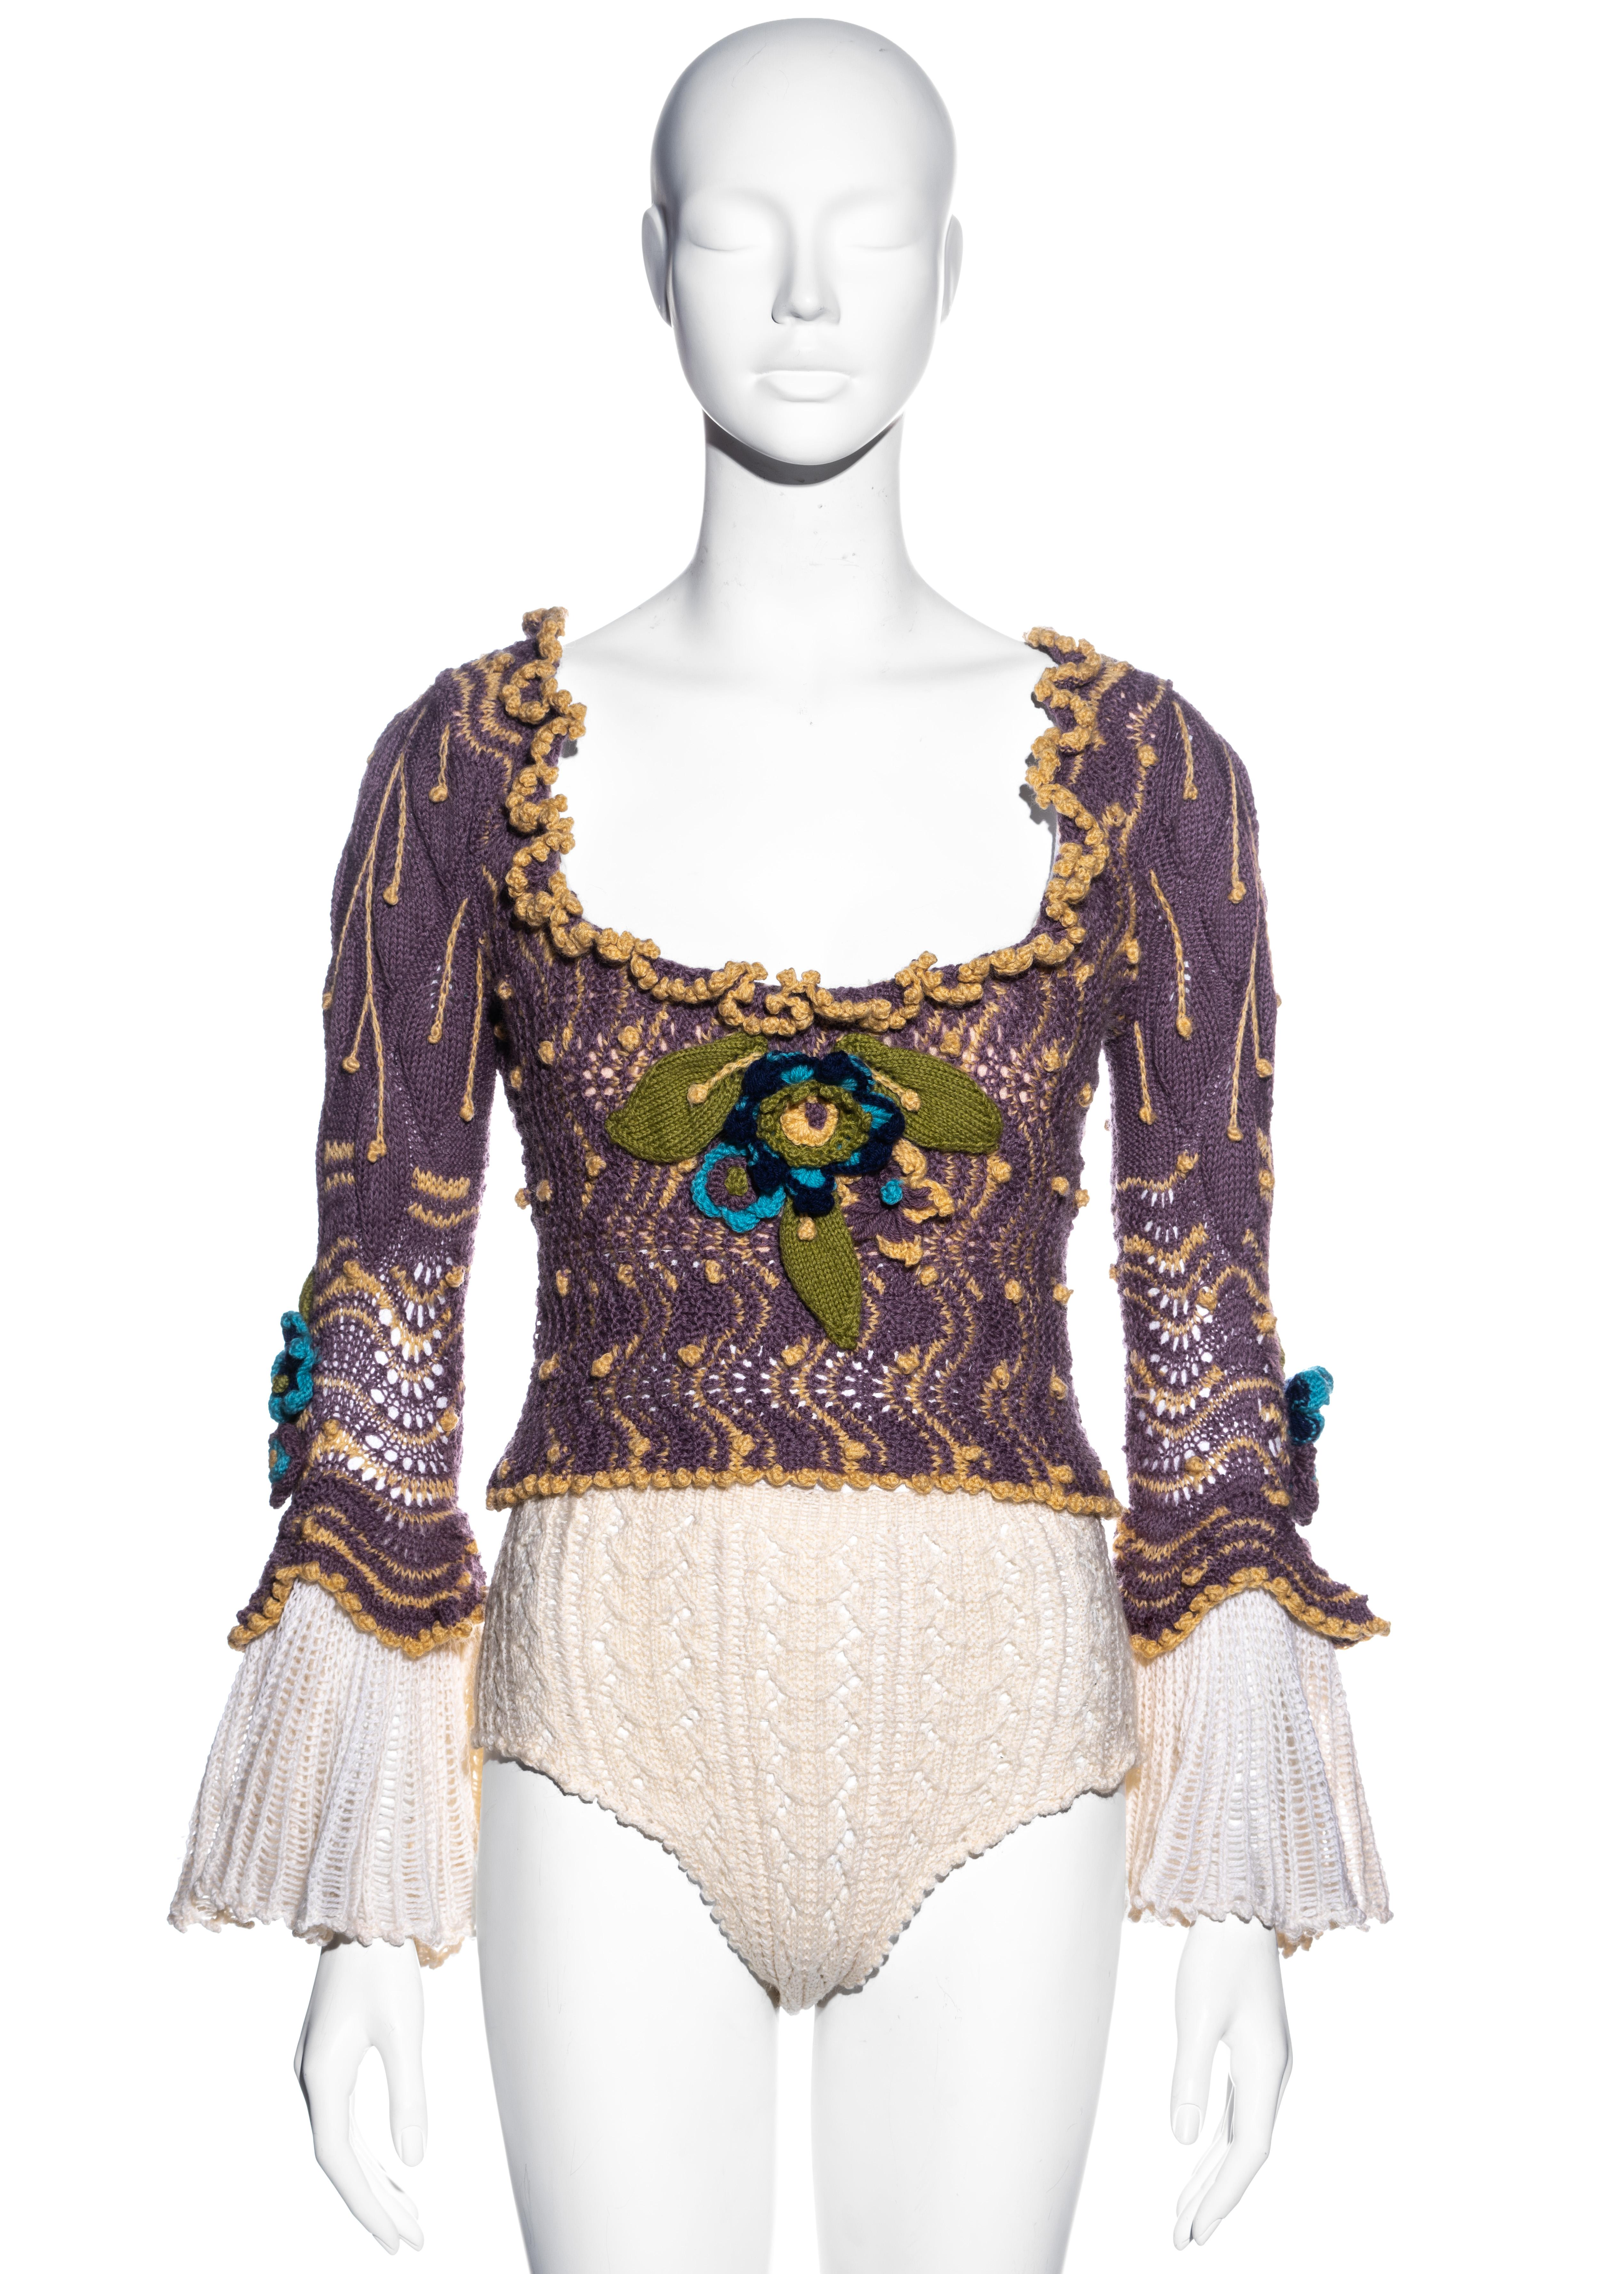 ▪ Vivienne Westwood purple crochet knit corset and panties set
▪ Built-in corset
▪ Knitted floral appliques 
▪ Fluted sleeves 
▪ Matching high waisted panties 
▪ Size Medium
▪ Fall-Winter 1994